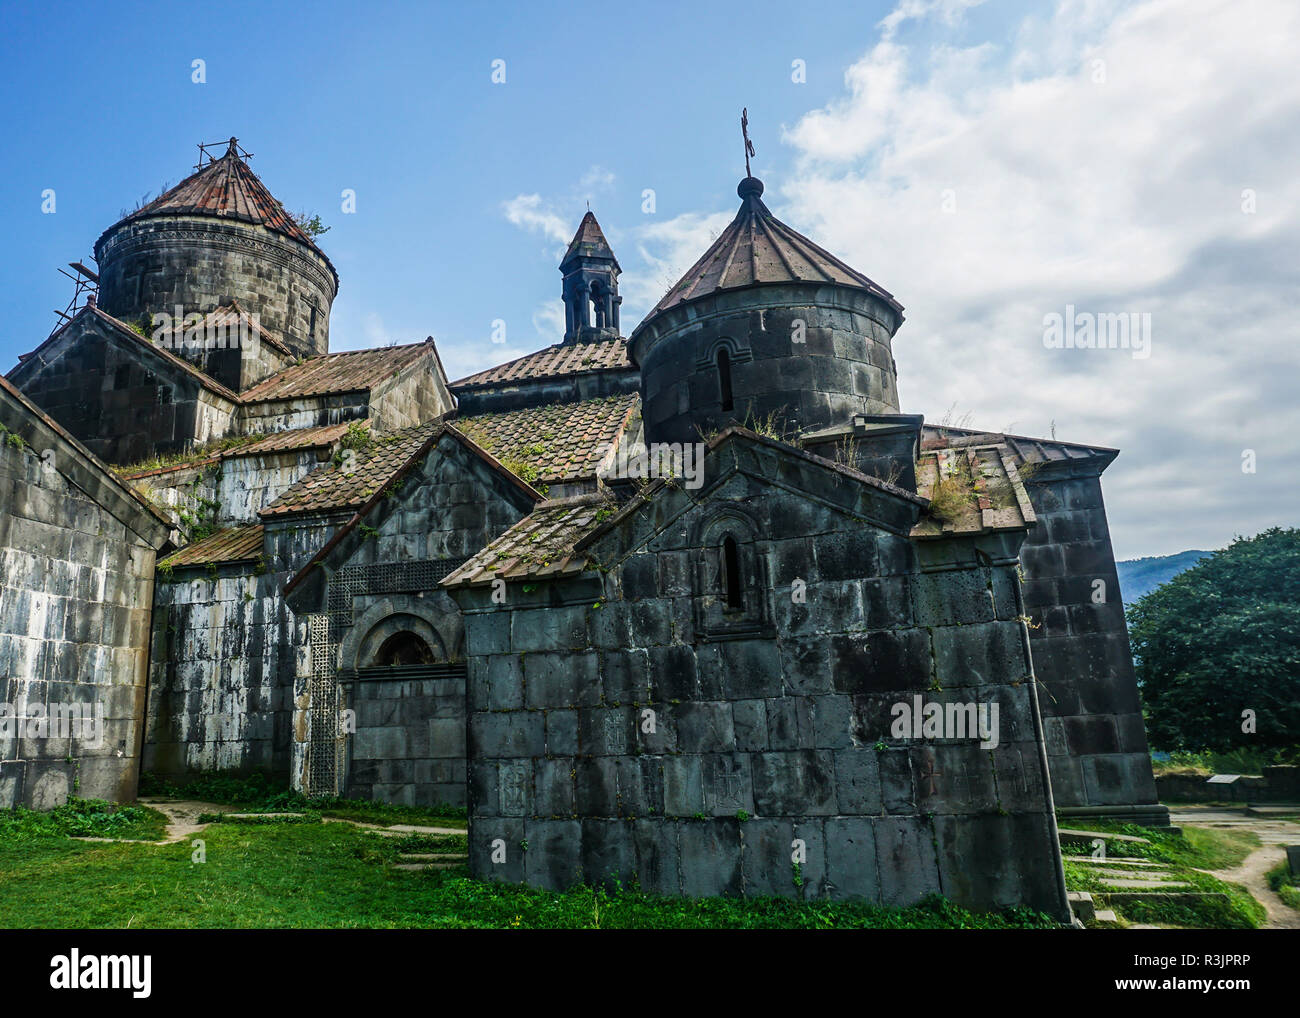 Haghpatavank Monastery Church Domes and Crosses in Summer with Blue Sky Stock Photo